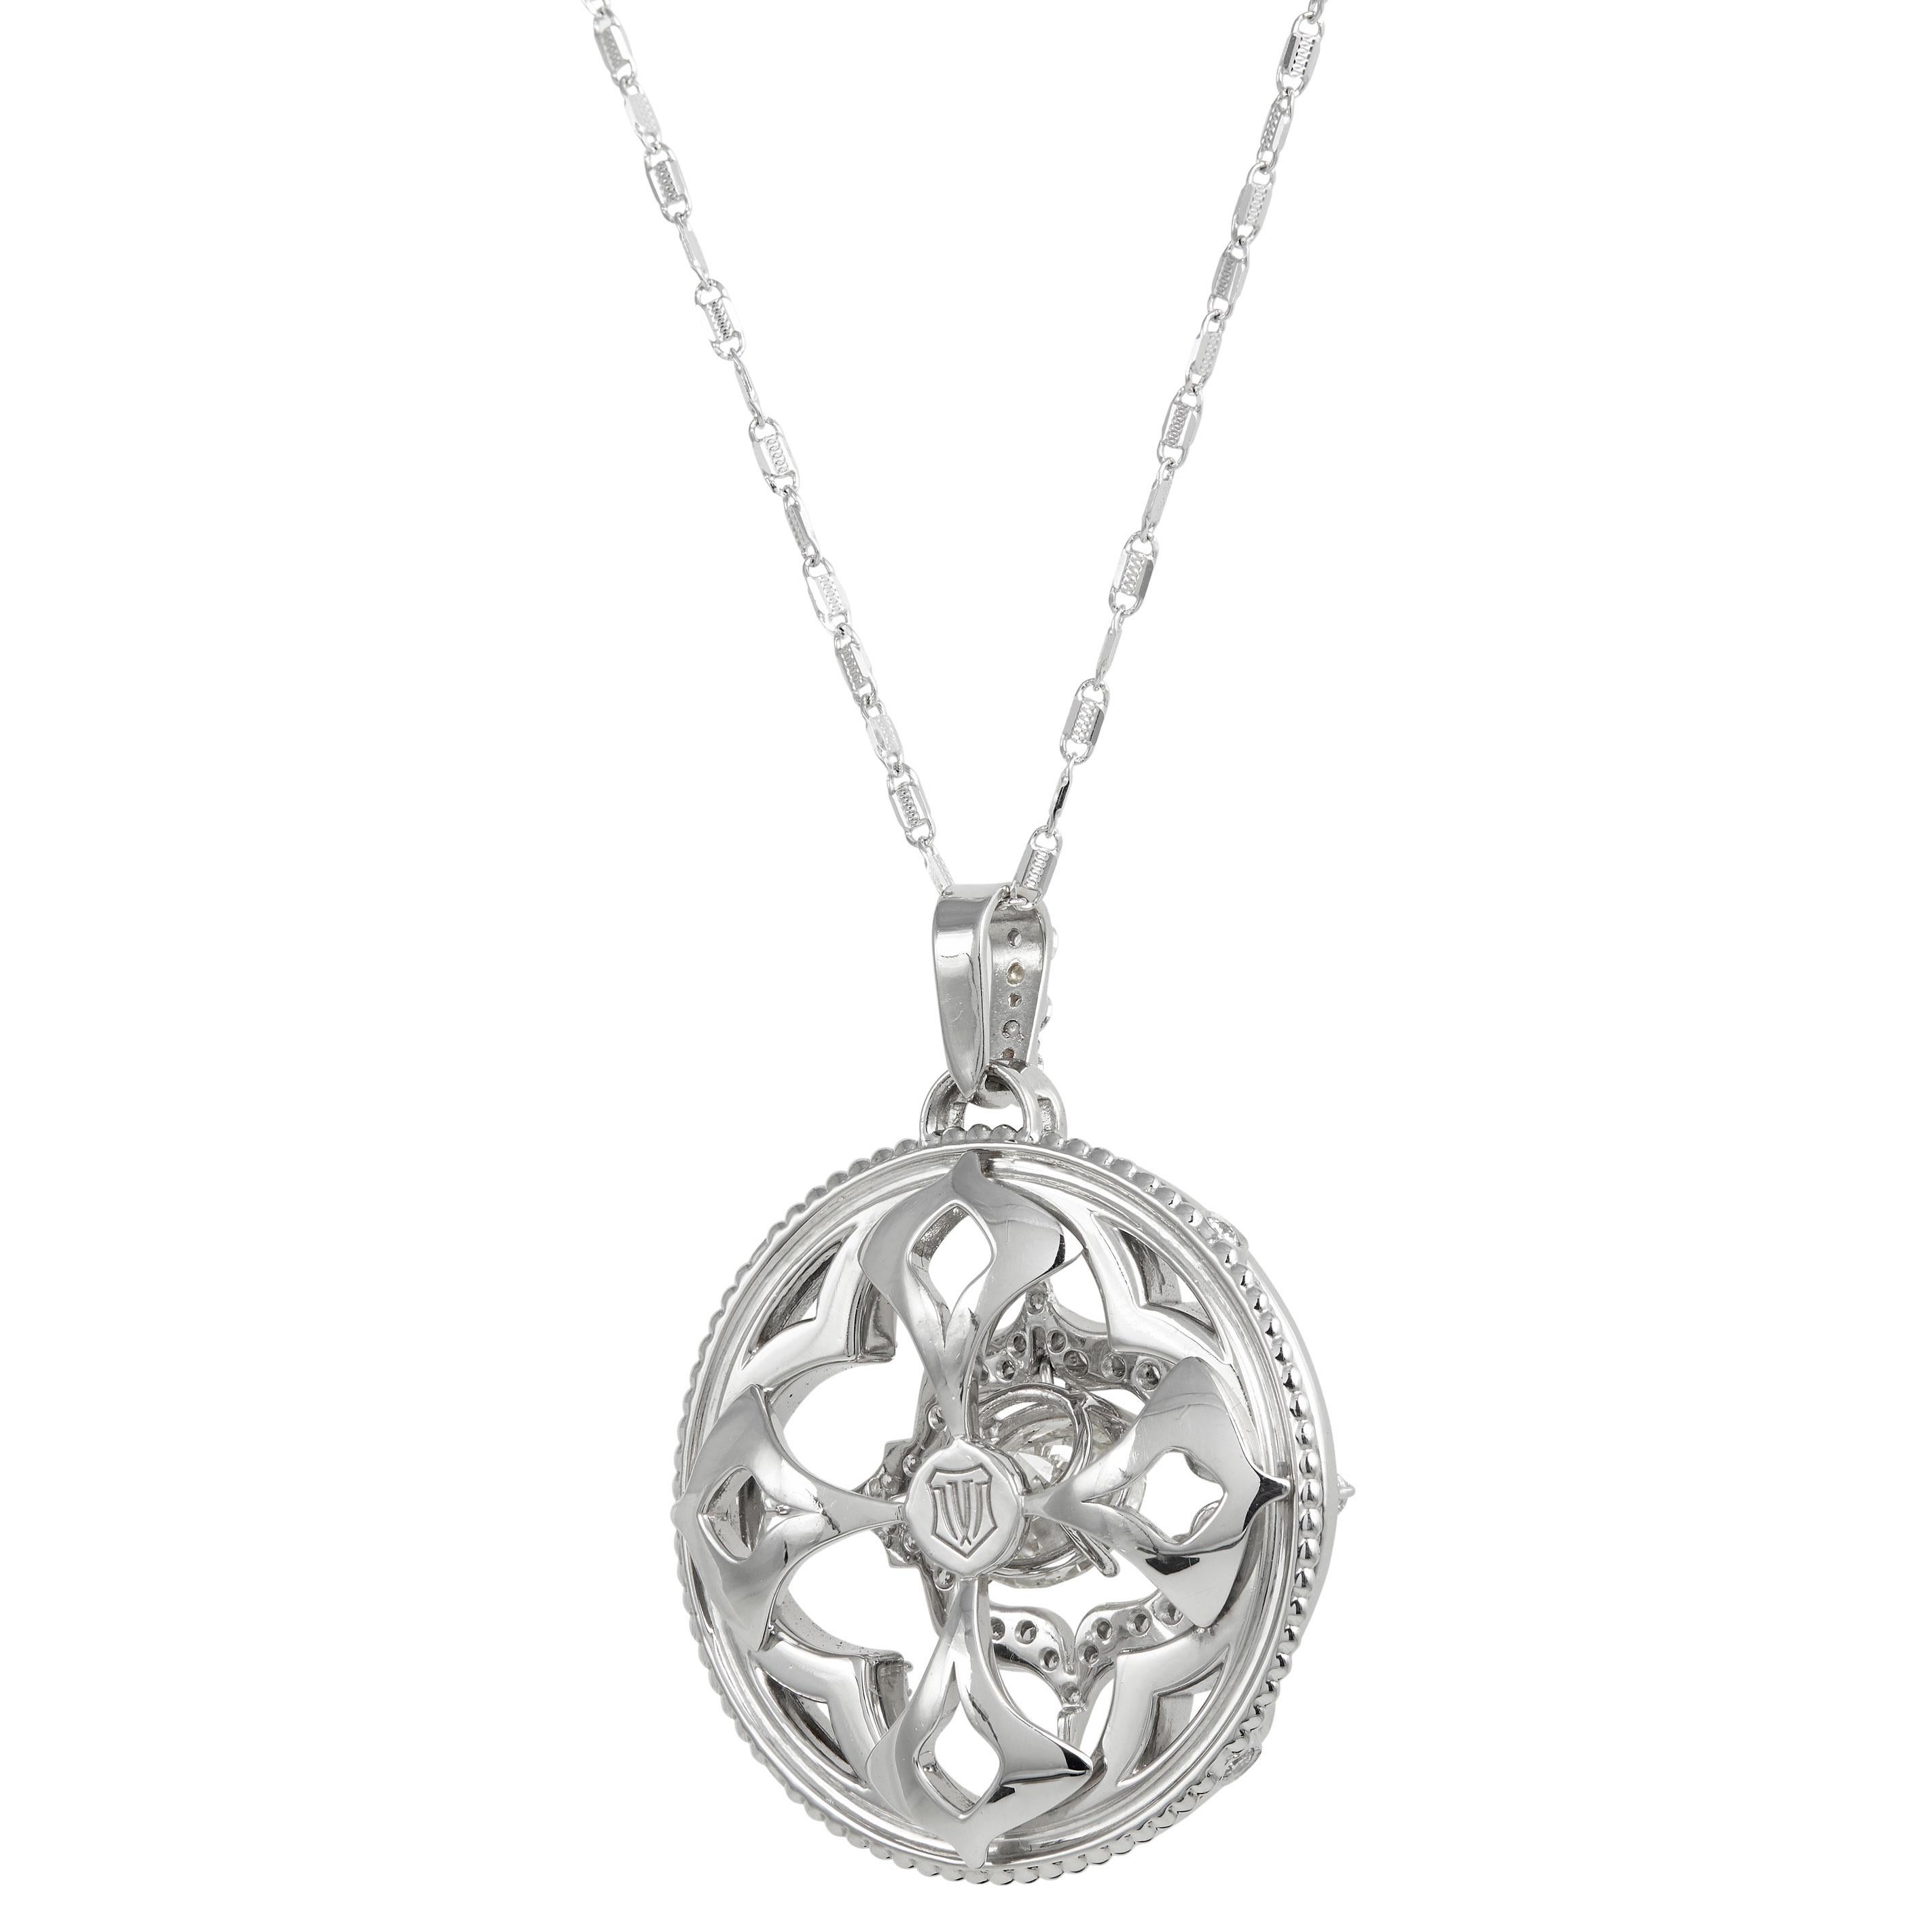 Star Quatrefoil Diamond pendant in 18k gold and platinum surrounded by round brilliant cut diamonds G color and VS clarity with approx. 0.88 CTS with center diamond modern round brilliant cut solitair diamond 3.12 CTS approx. This custom made